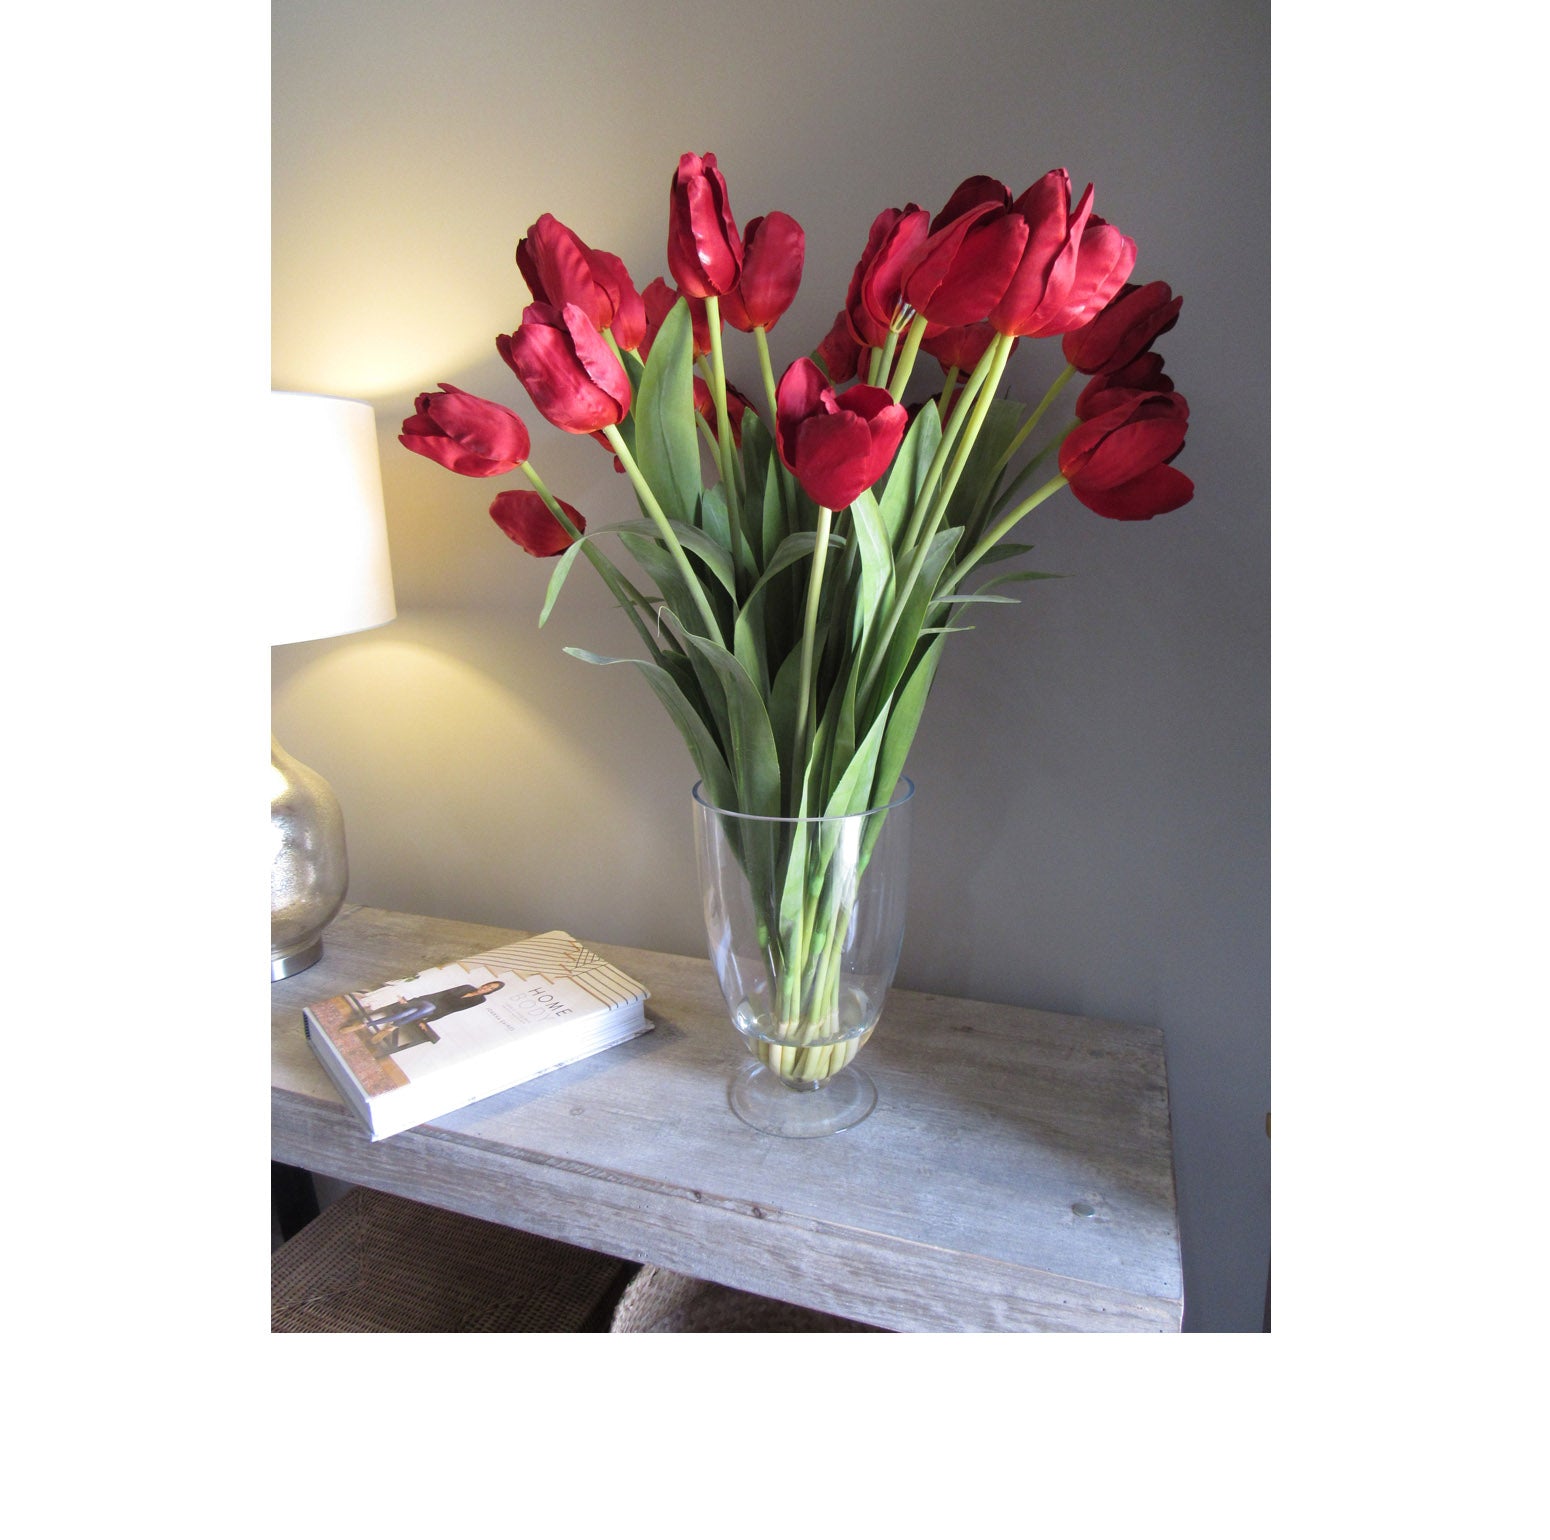 Tulips for Your Home